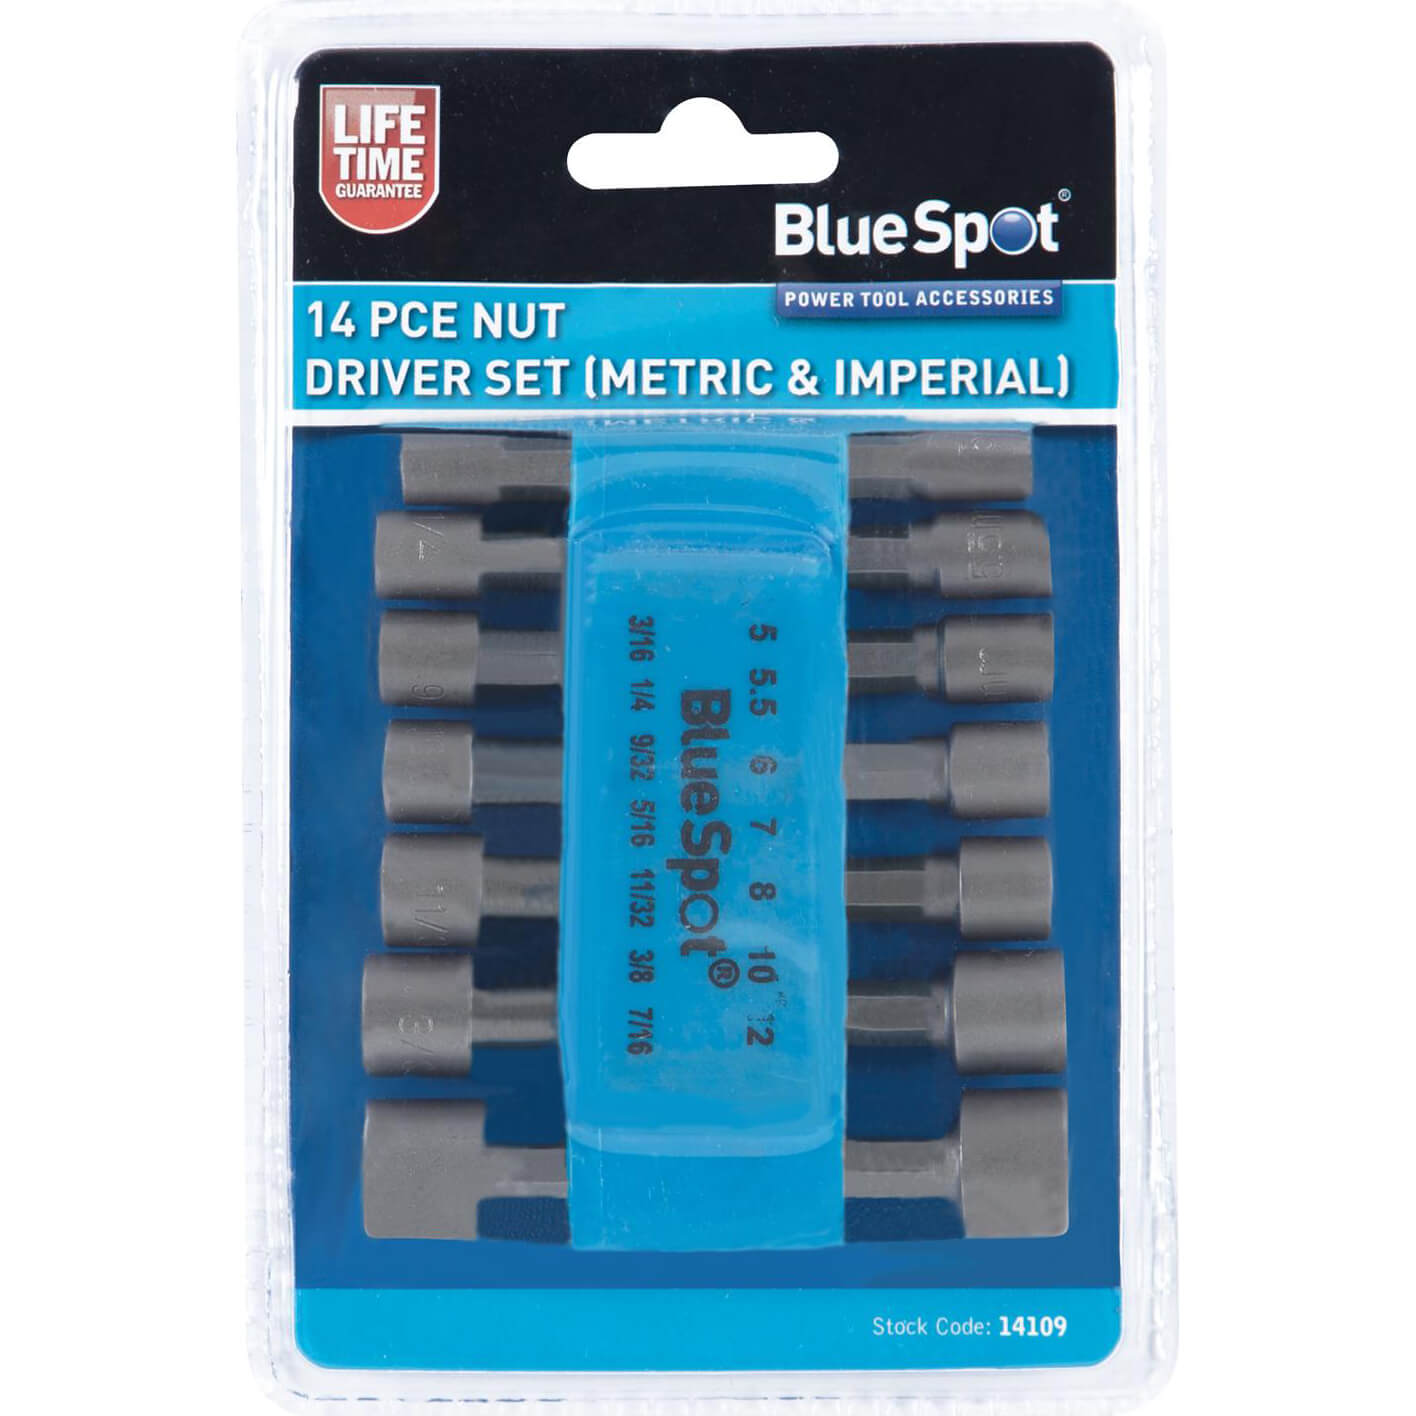 Photos - Power Tool Accessory BlueSpot 14 Piece Metric and Imperial Nut Driver Set 14109 